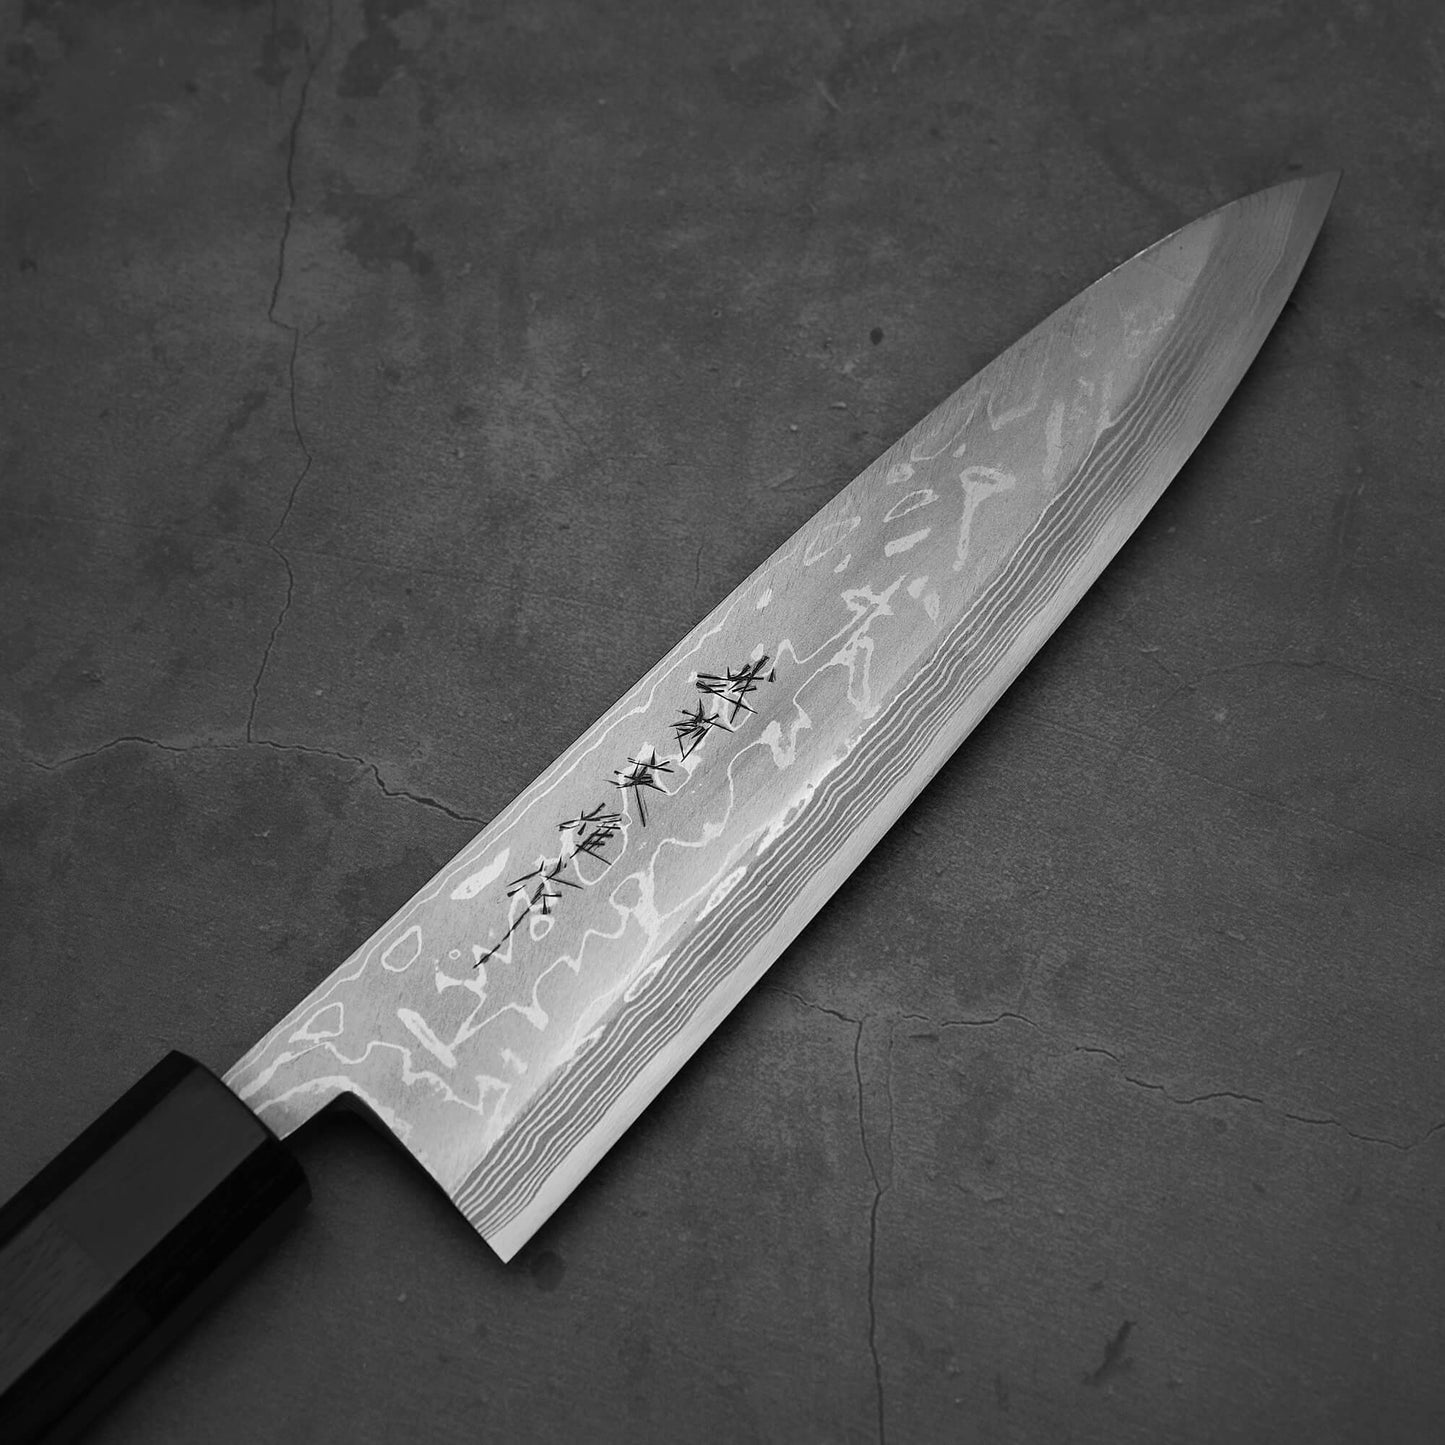 Top view of Hideo Kitaoka damascus aogami#2 mioroshi deba 210mm. Image focuses on the right side of the blade